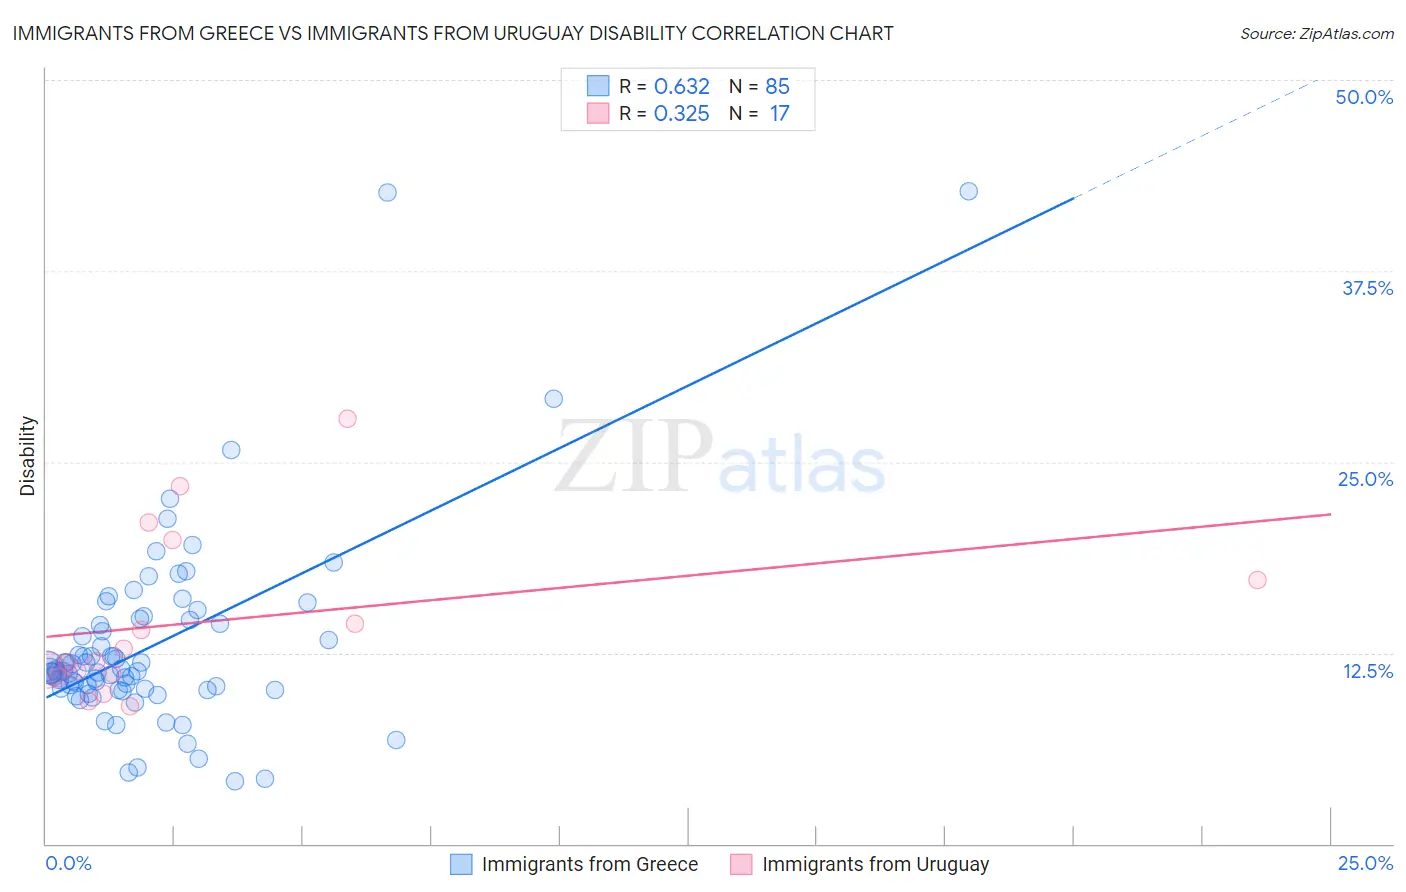 Immigrants from Greece vs Immigrants from Uruguay Disability